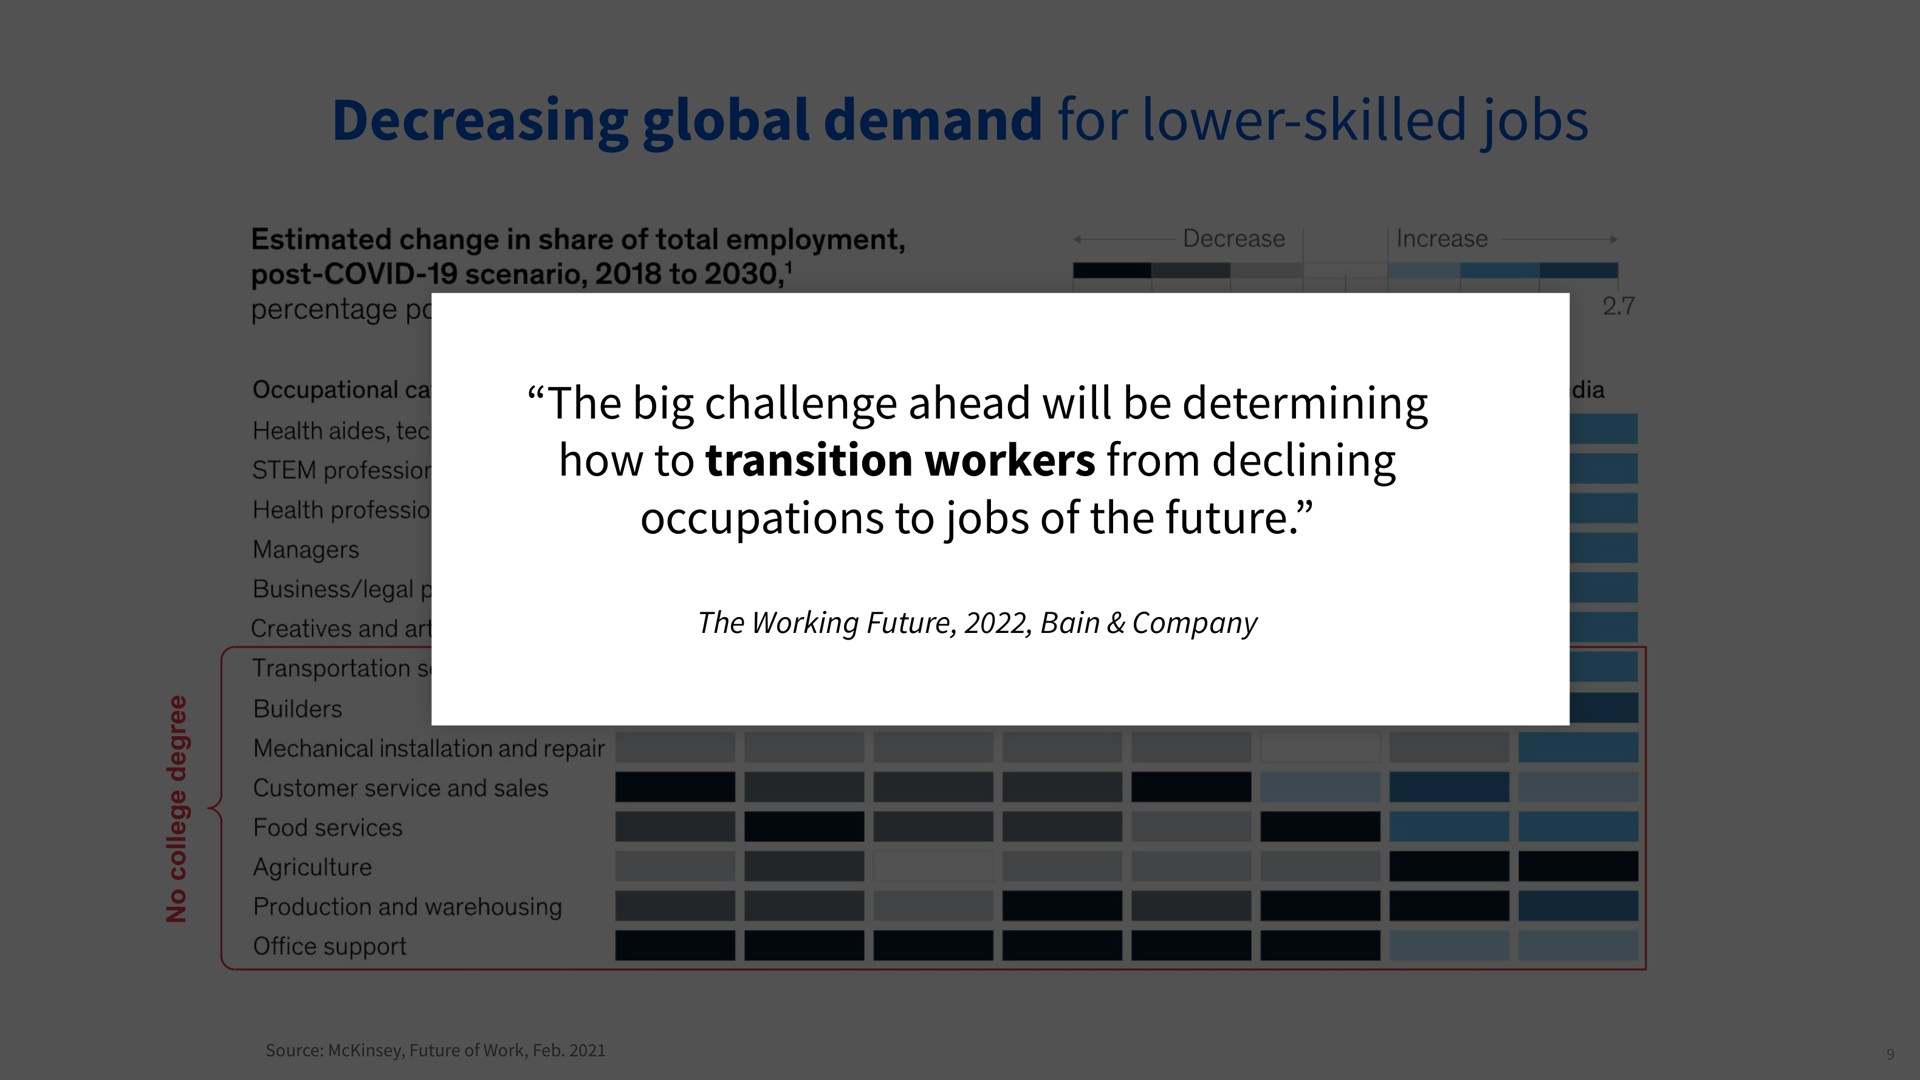 typical education level no formal education high school diploma non degree college degree decreasing global demand for lower skilled jobs the big challenge ahead will be determining how to transition workers from declining occupations to jobs of the future the working future bain company | Coursera